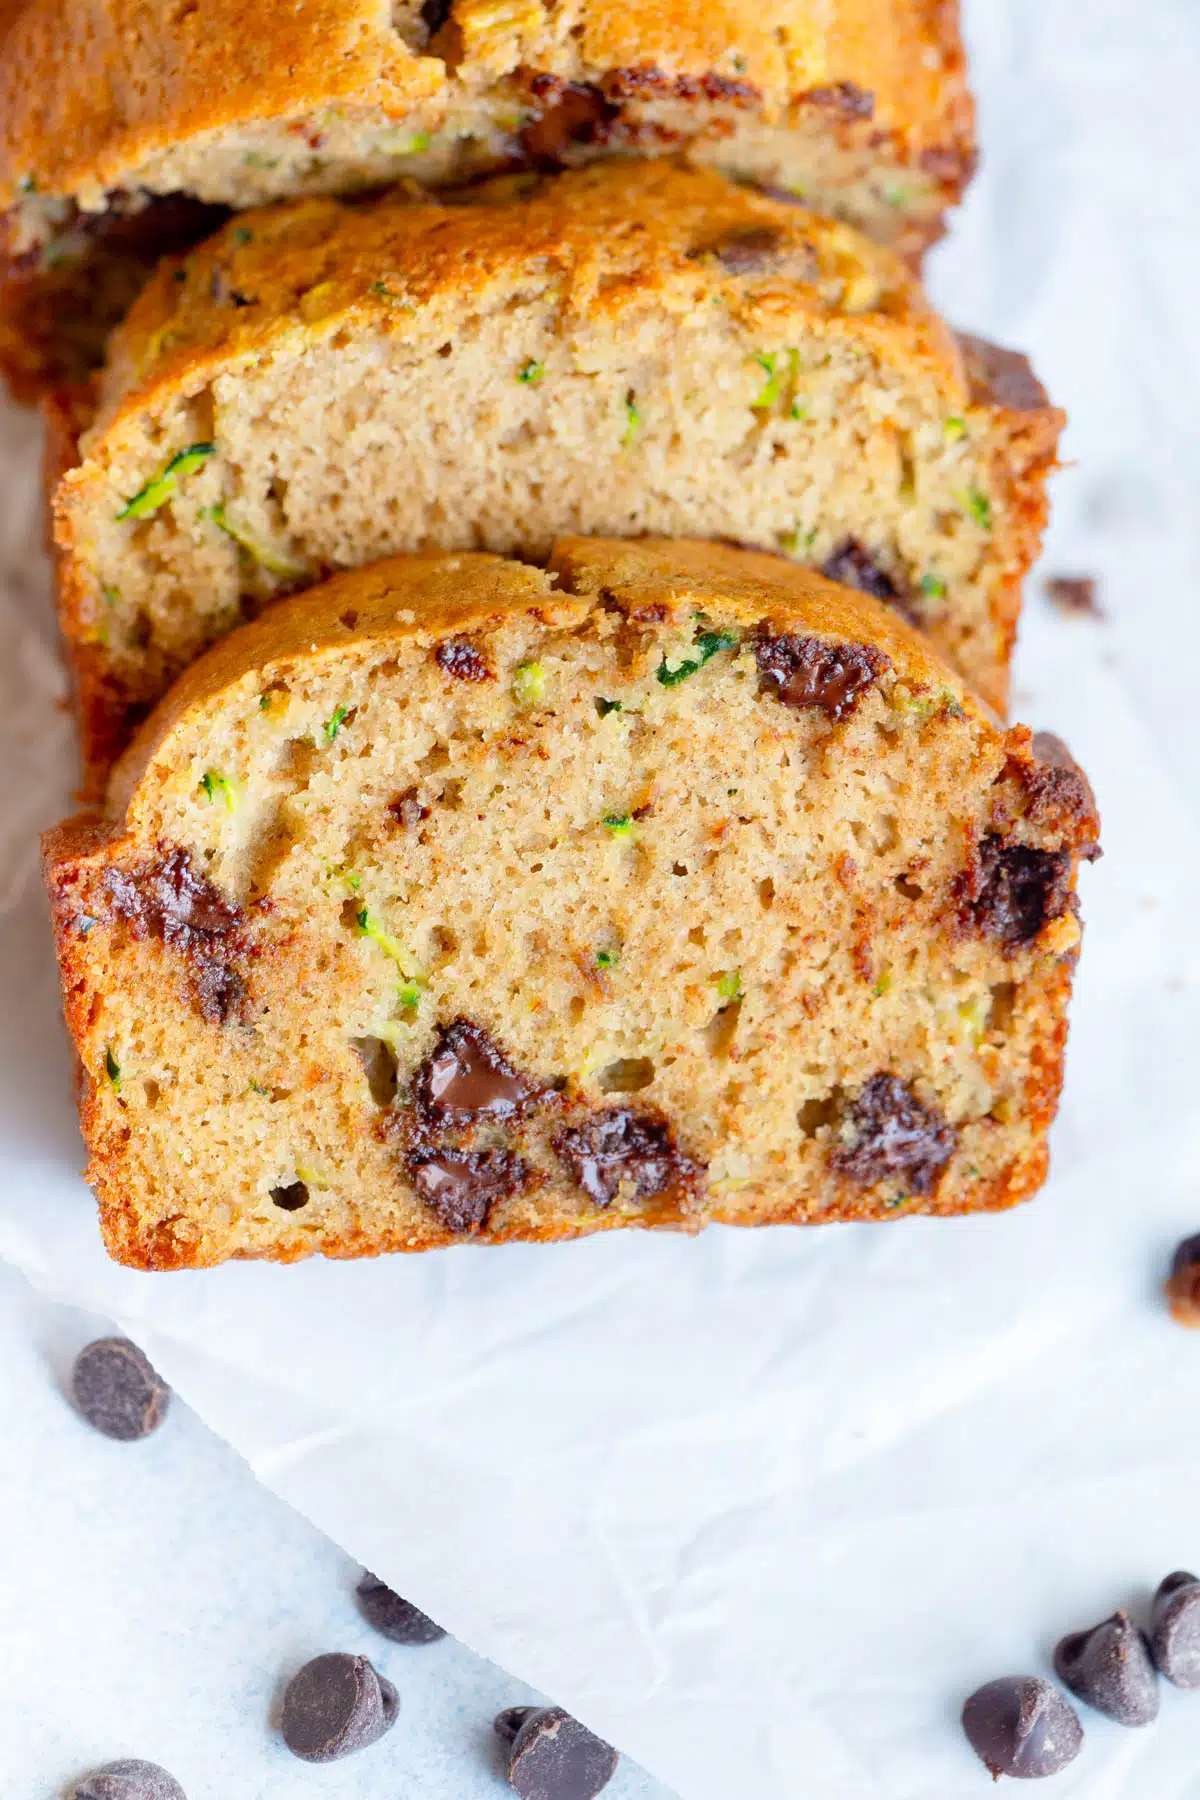 Sliced Chocolate Chip Zucchini Bread on a white background.